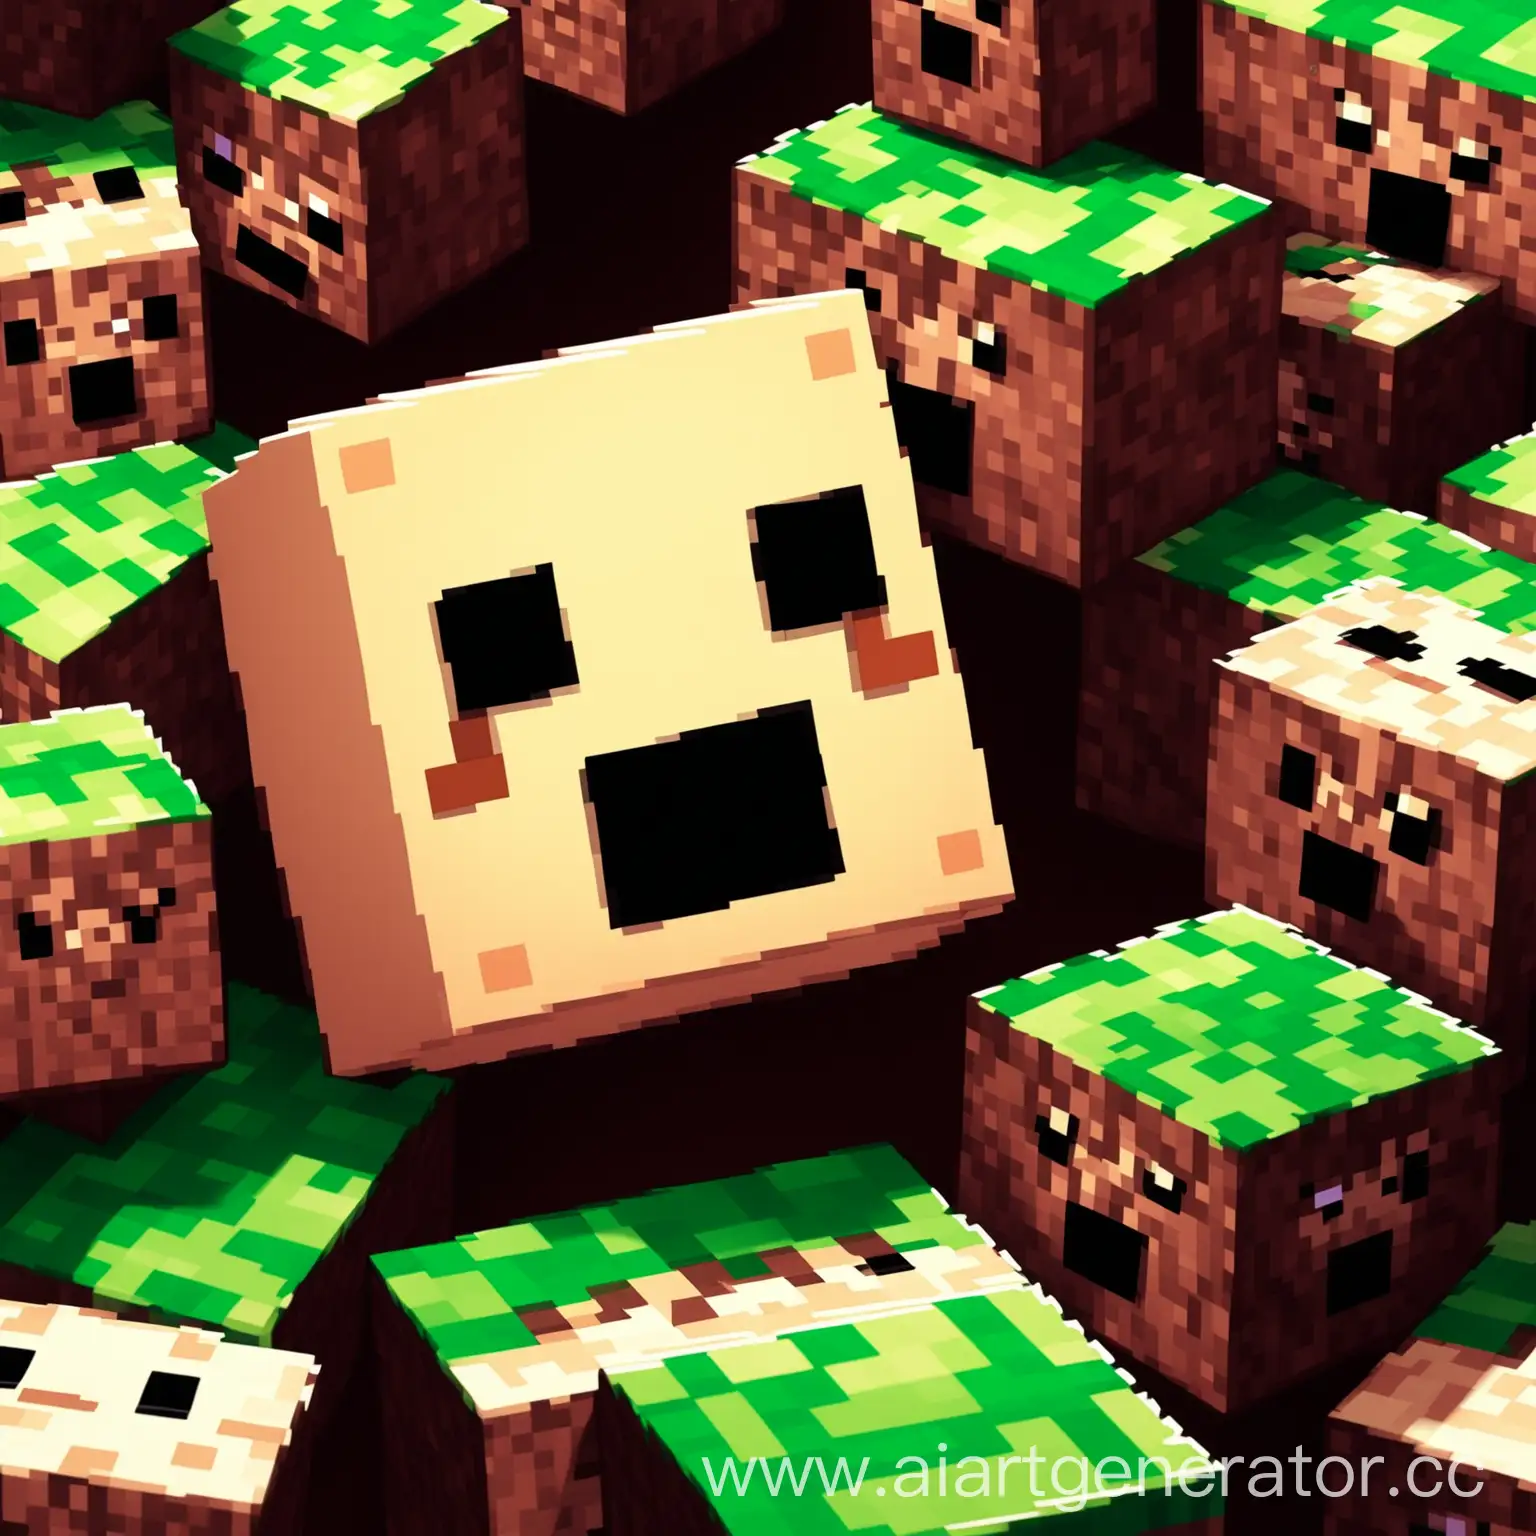 Adorable-Minecraft-Block-Character-with-Expressive-Face